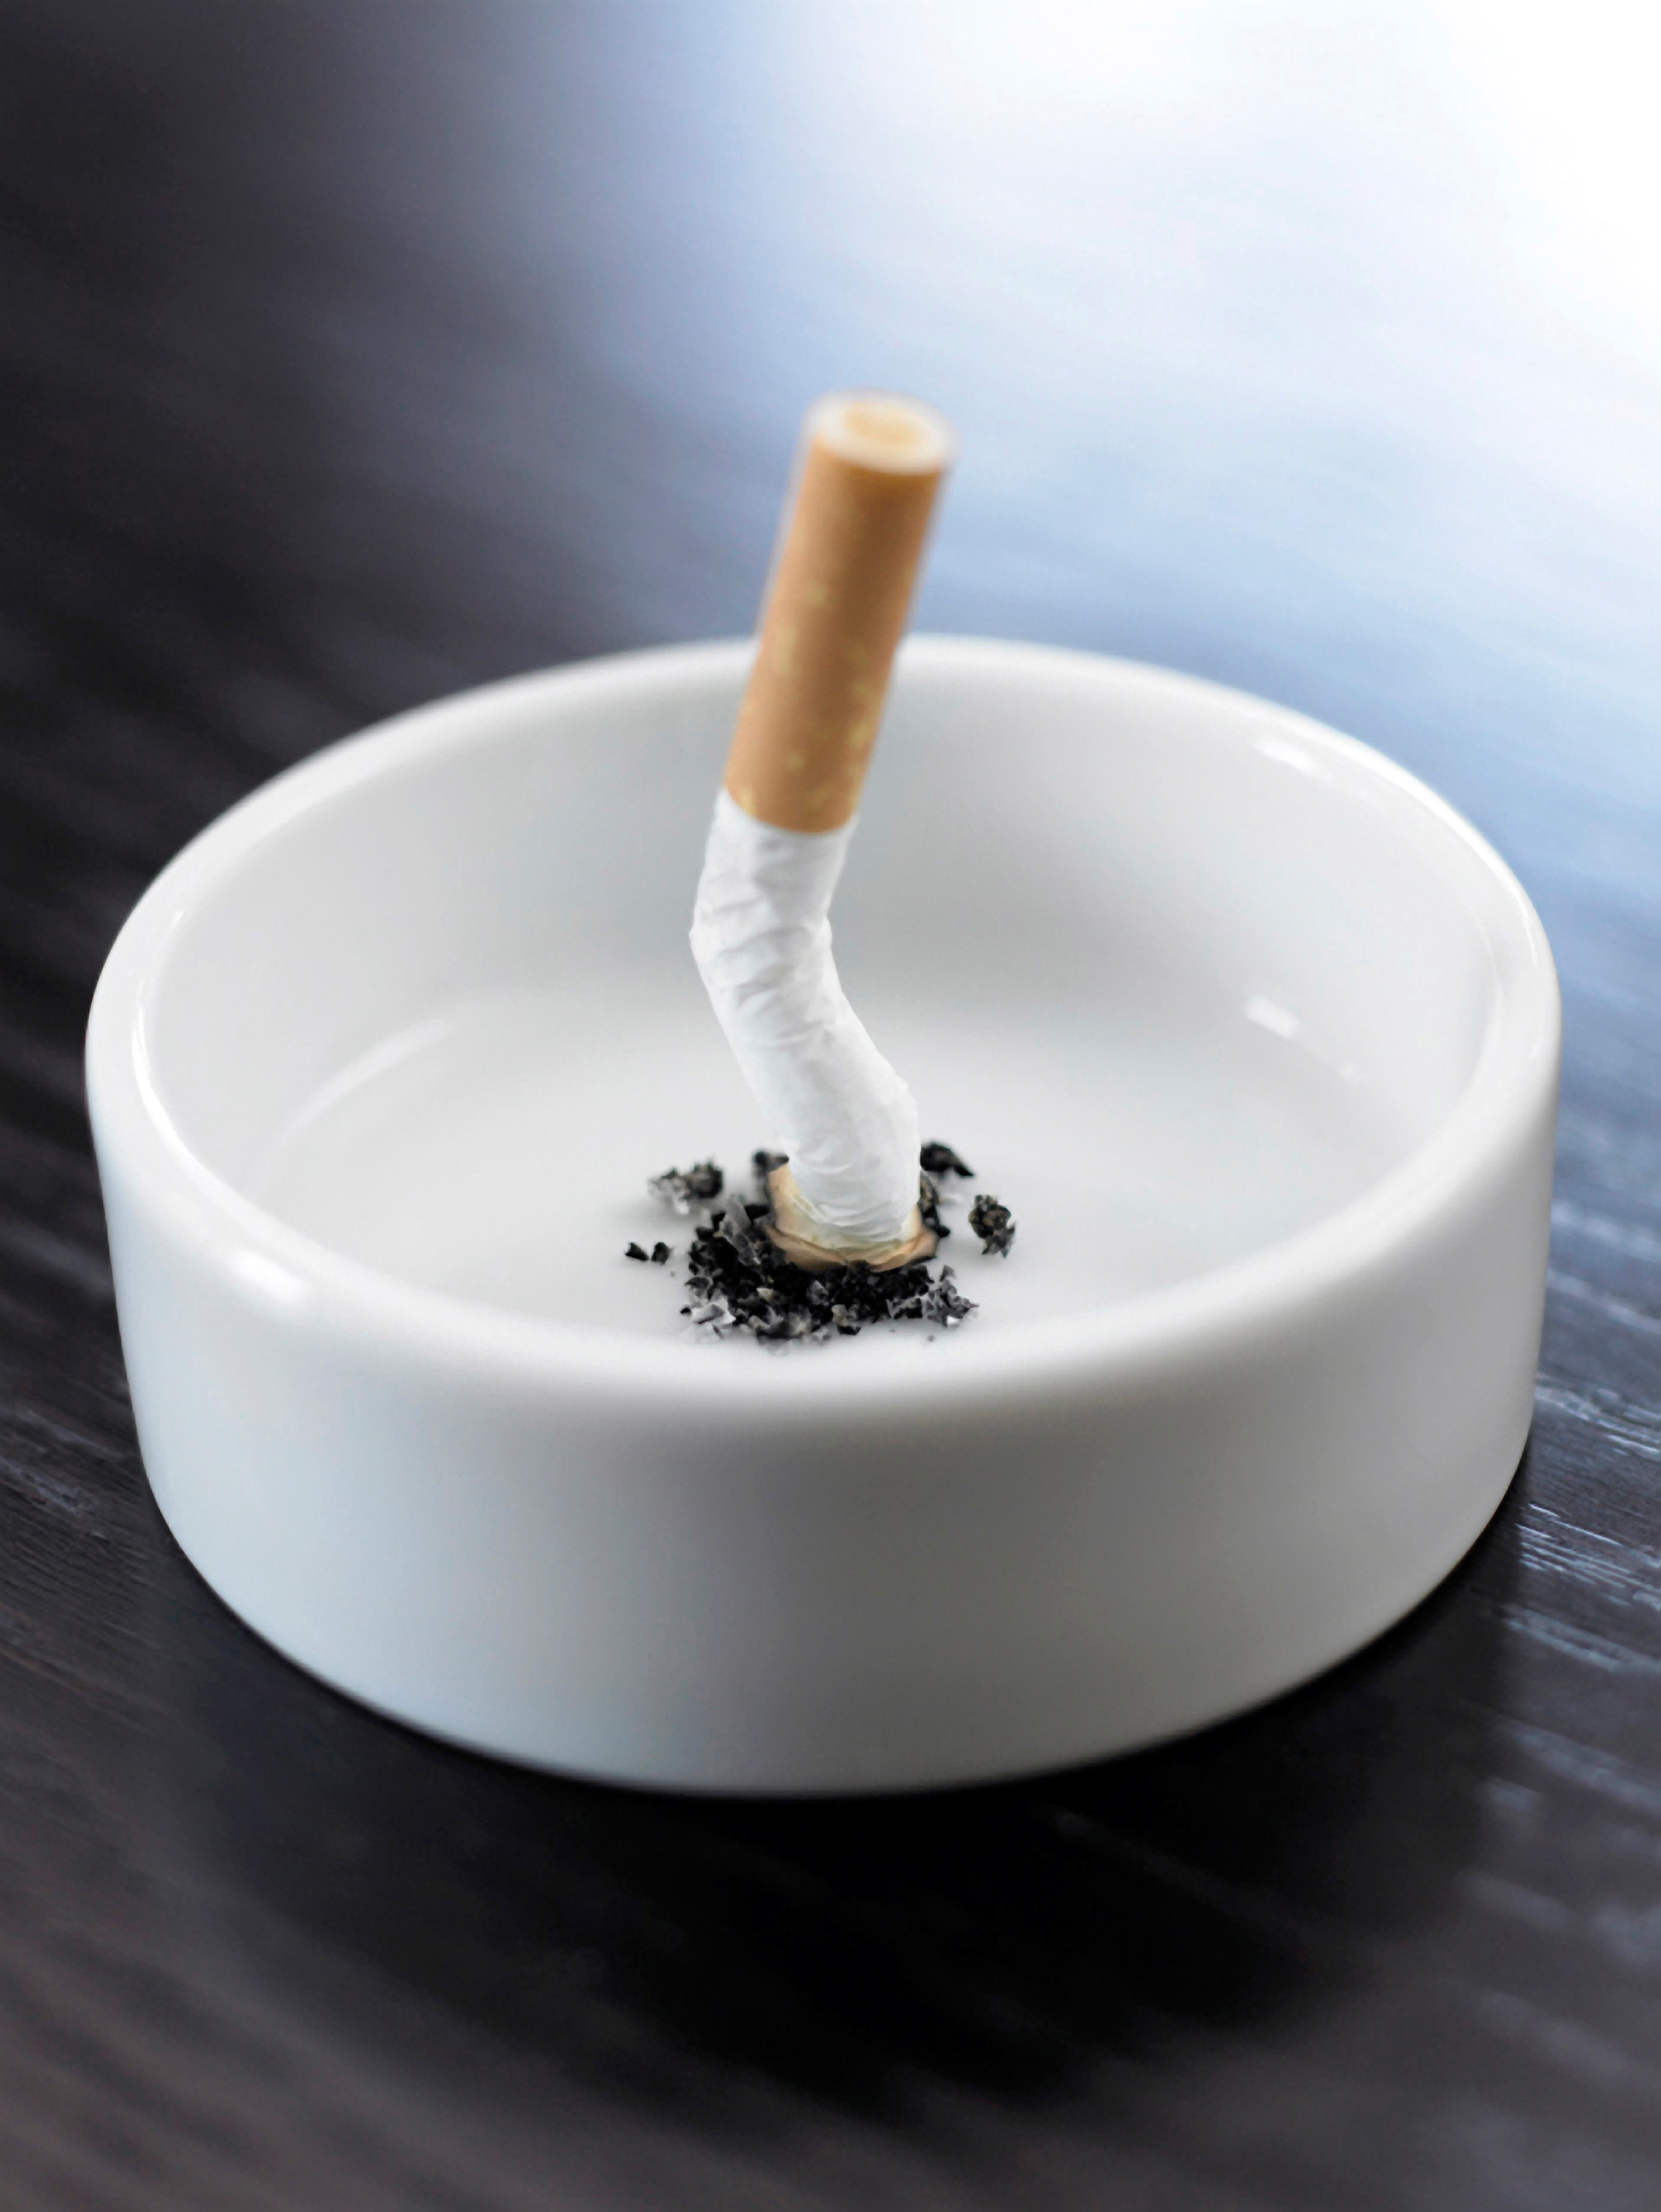 Stubbed out cigarette in ashtray. (Getty Images/OJO Images RF— Adam Gault)